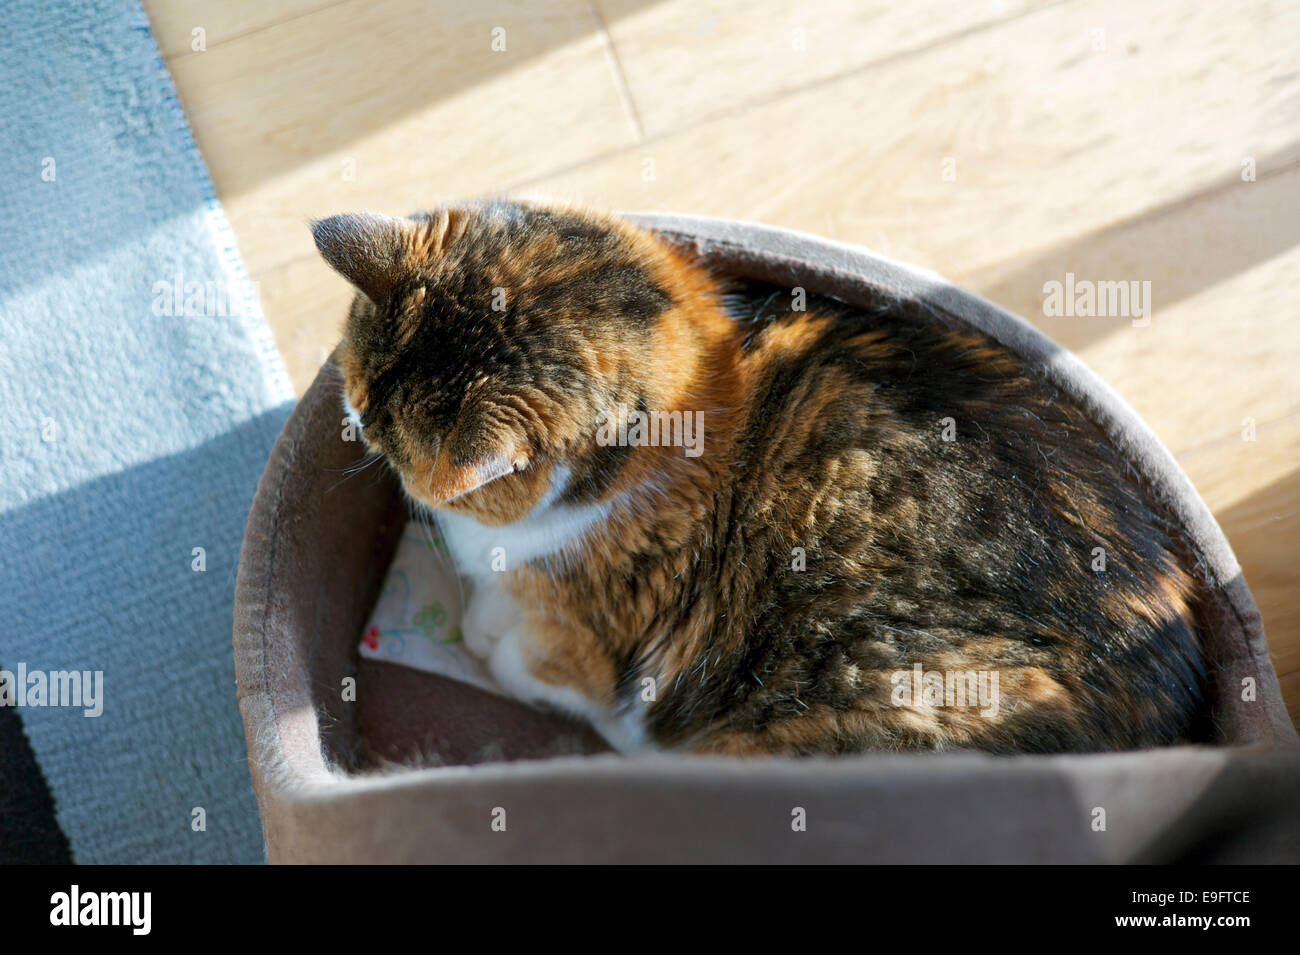 Cat sleeping in a cat bed Stock Photo